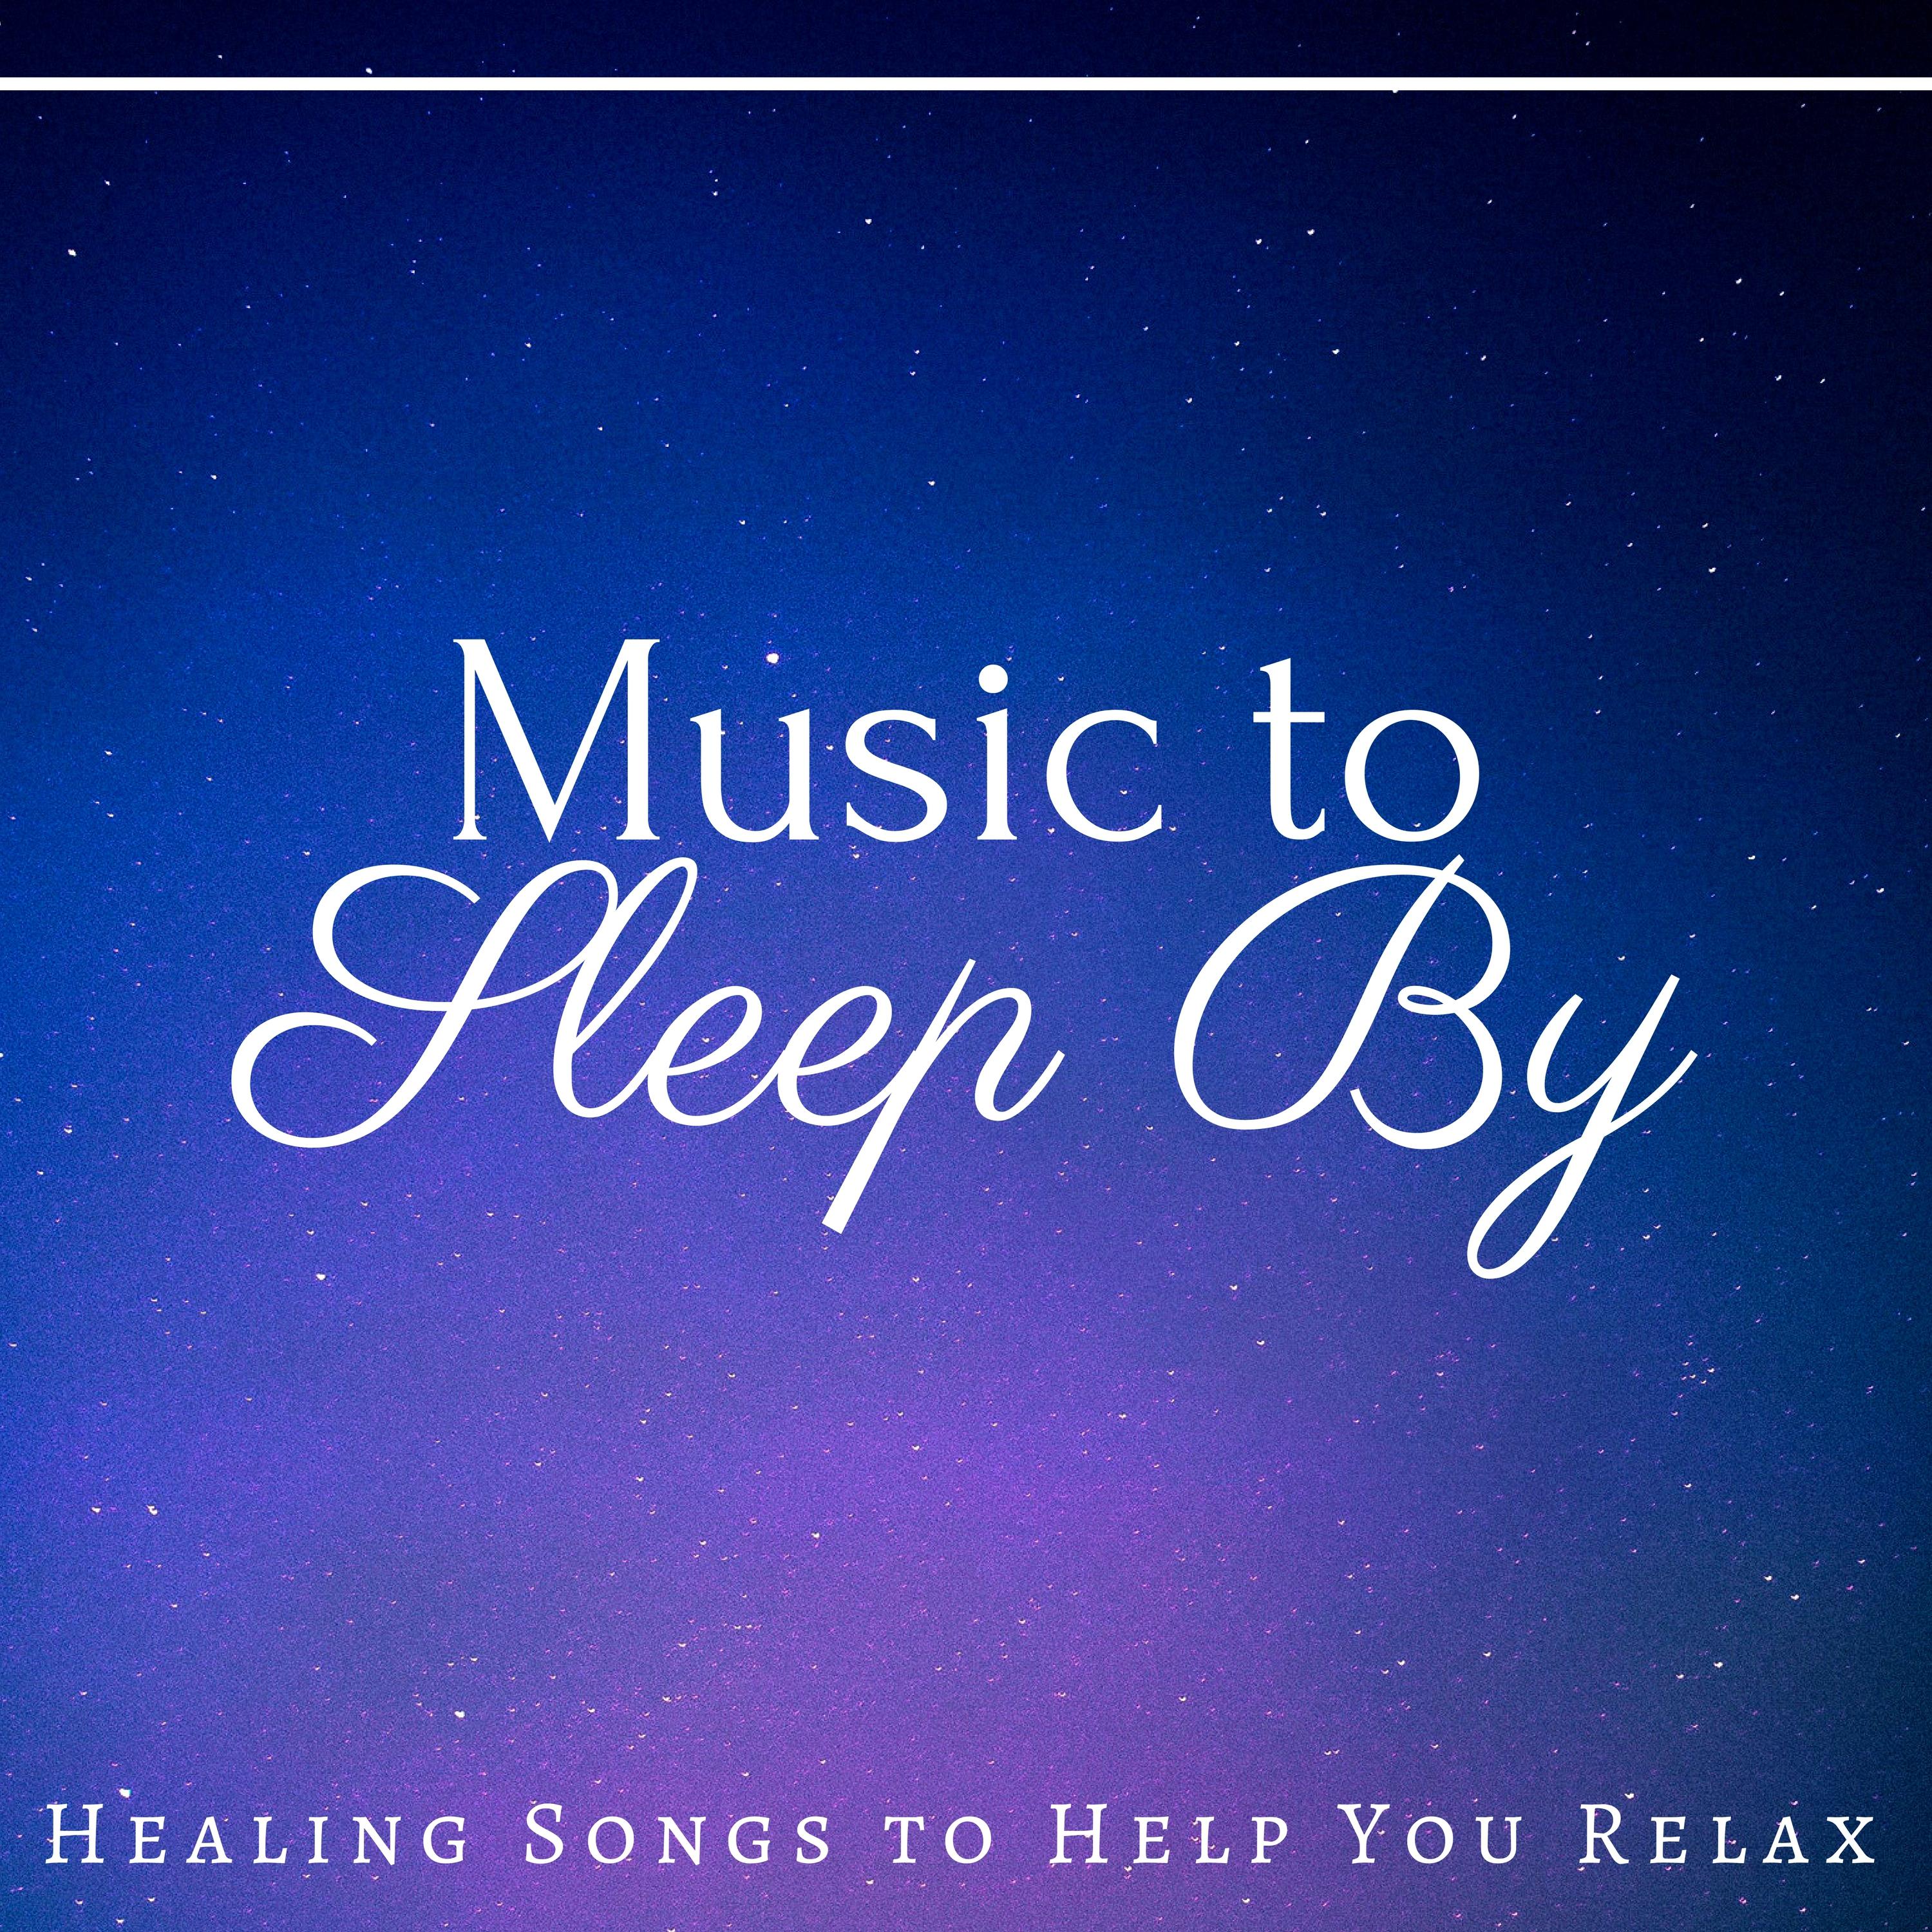 Music to Sleep By - Healing Songs to Help You Relax, Meditate and Sleep, Mindfulness, Massage, Yoga, Reiki, Spa Music, Natural White Noise